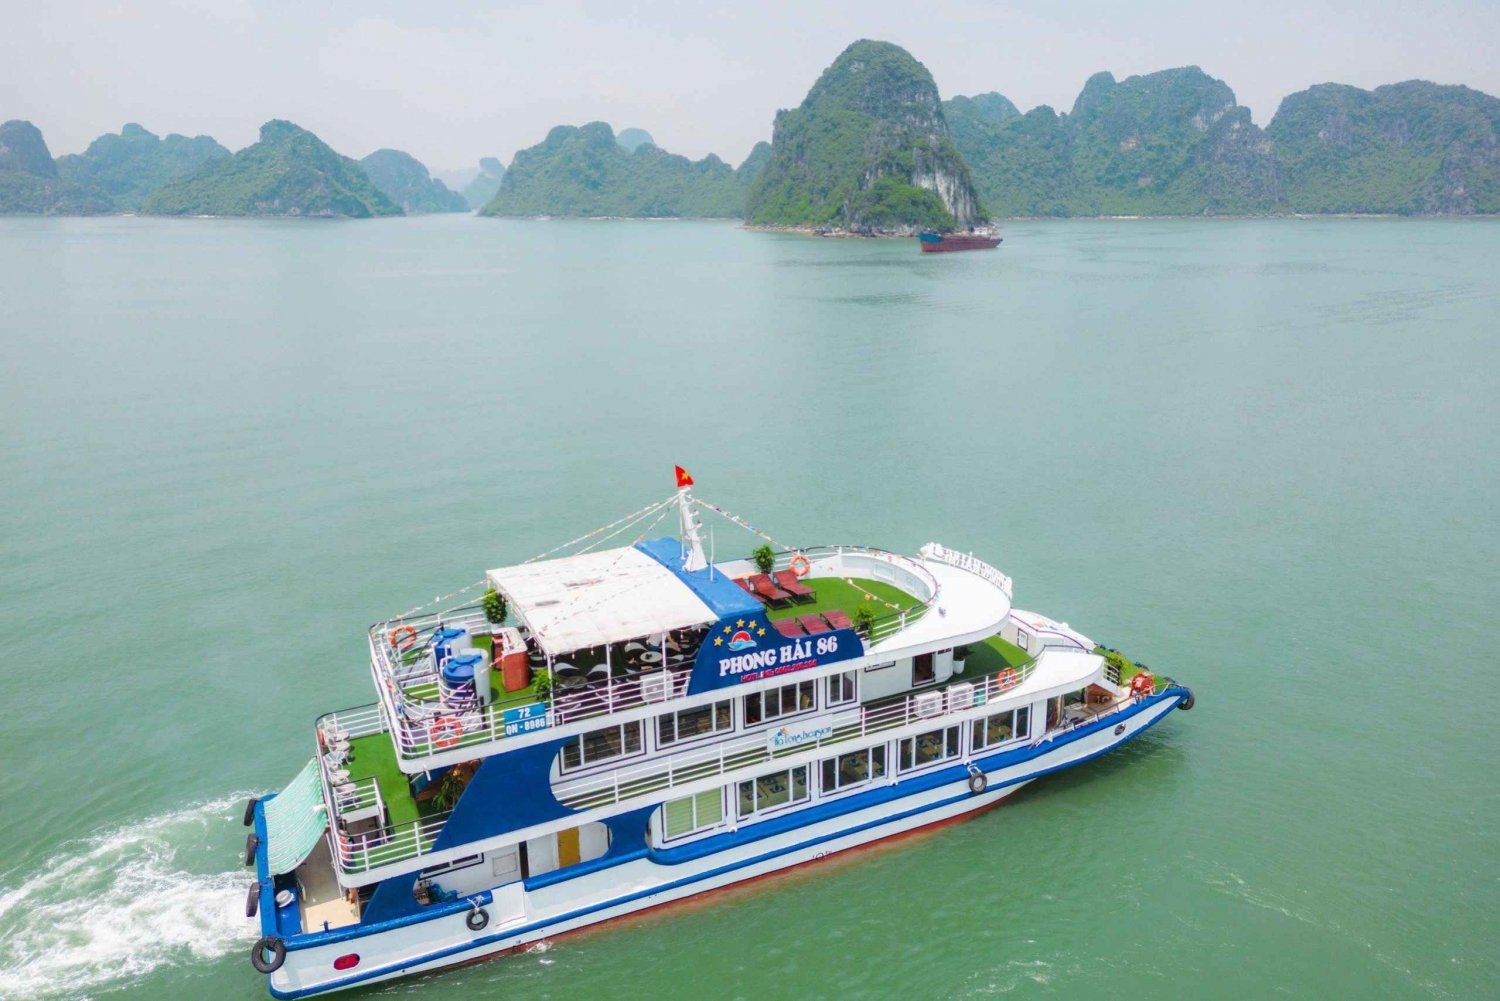 From Hanoi: Visit Ha Long Bay In 1 Day With A Luxury Cruise